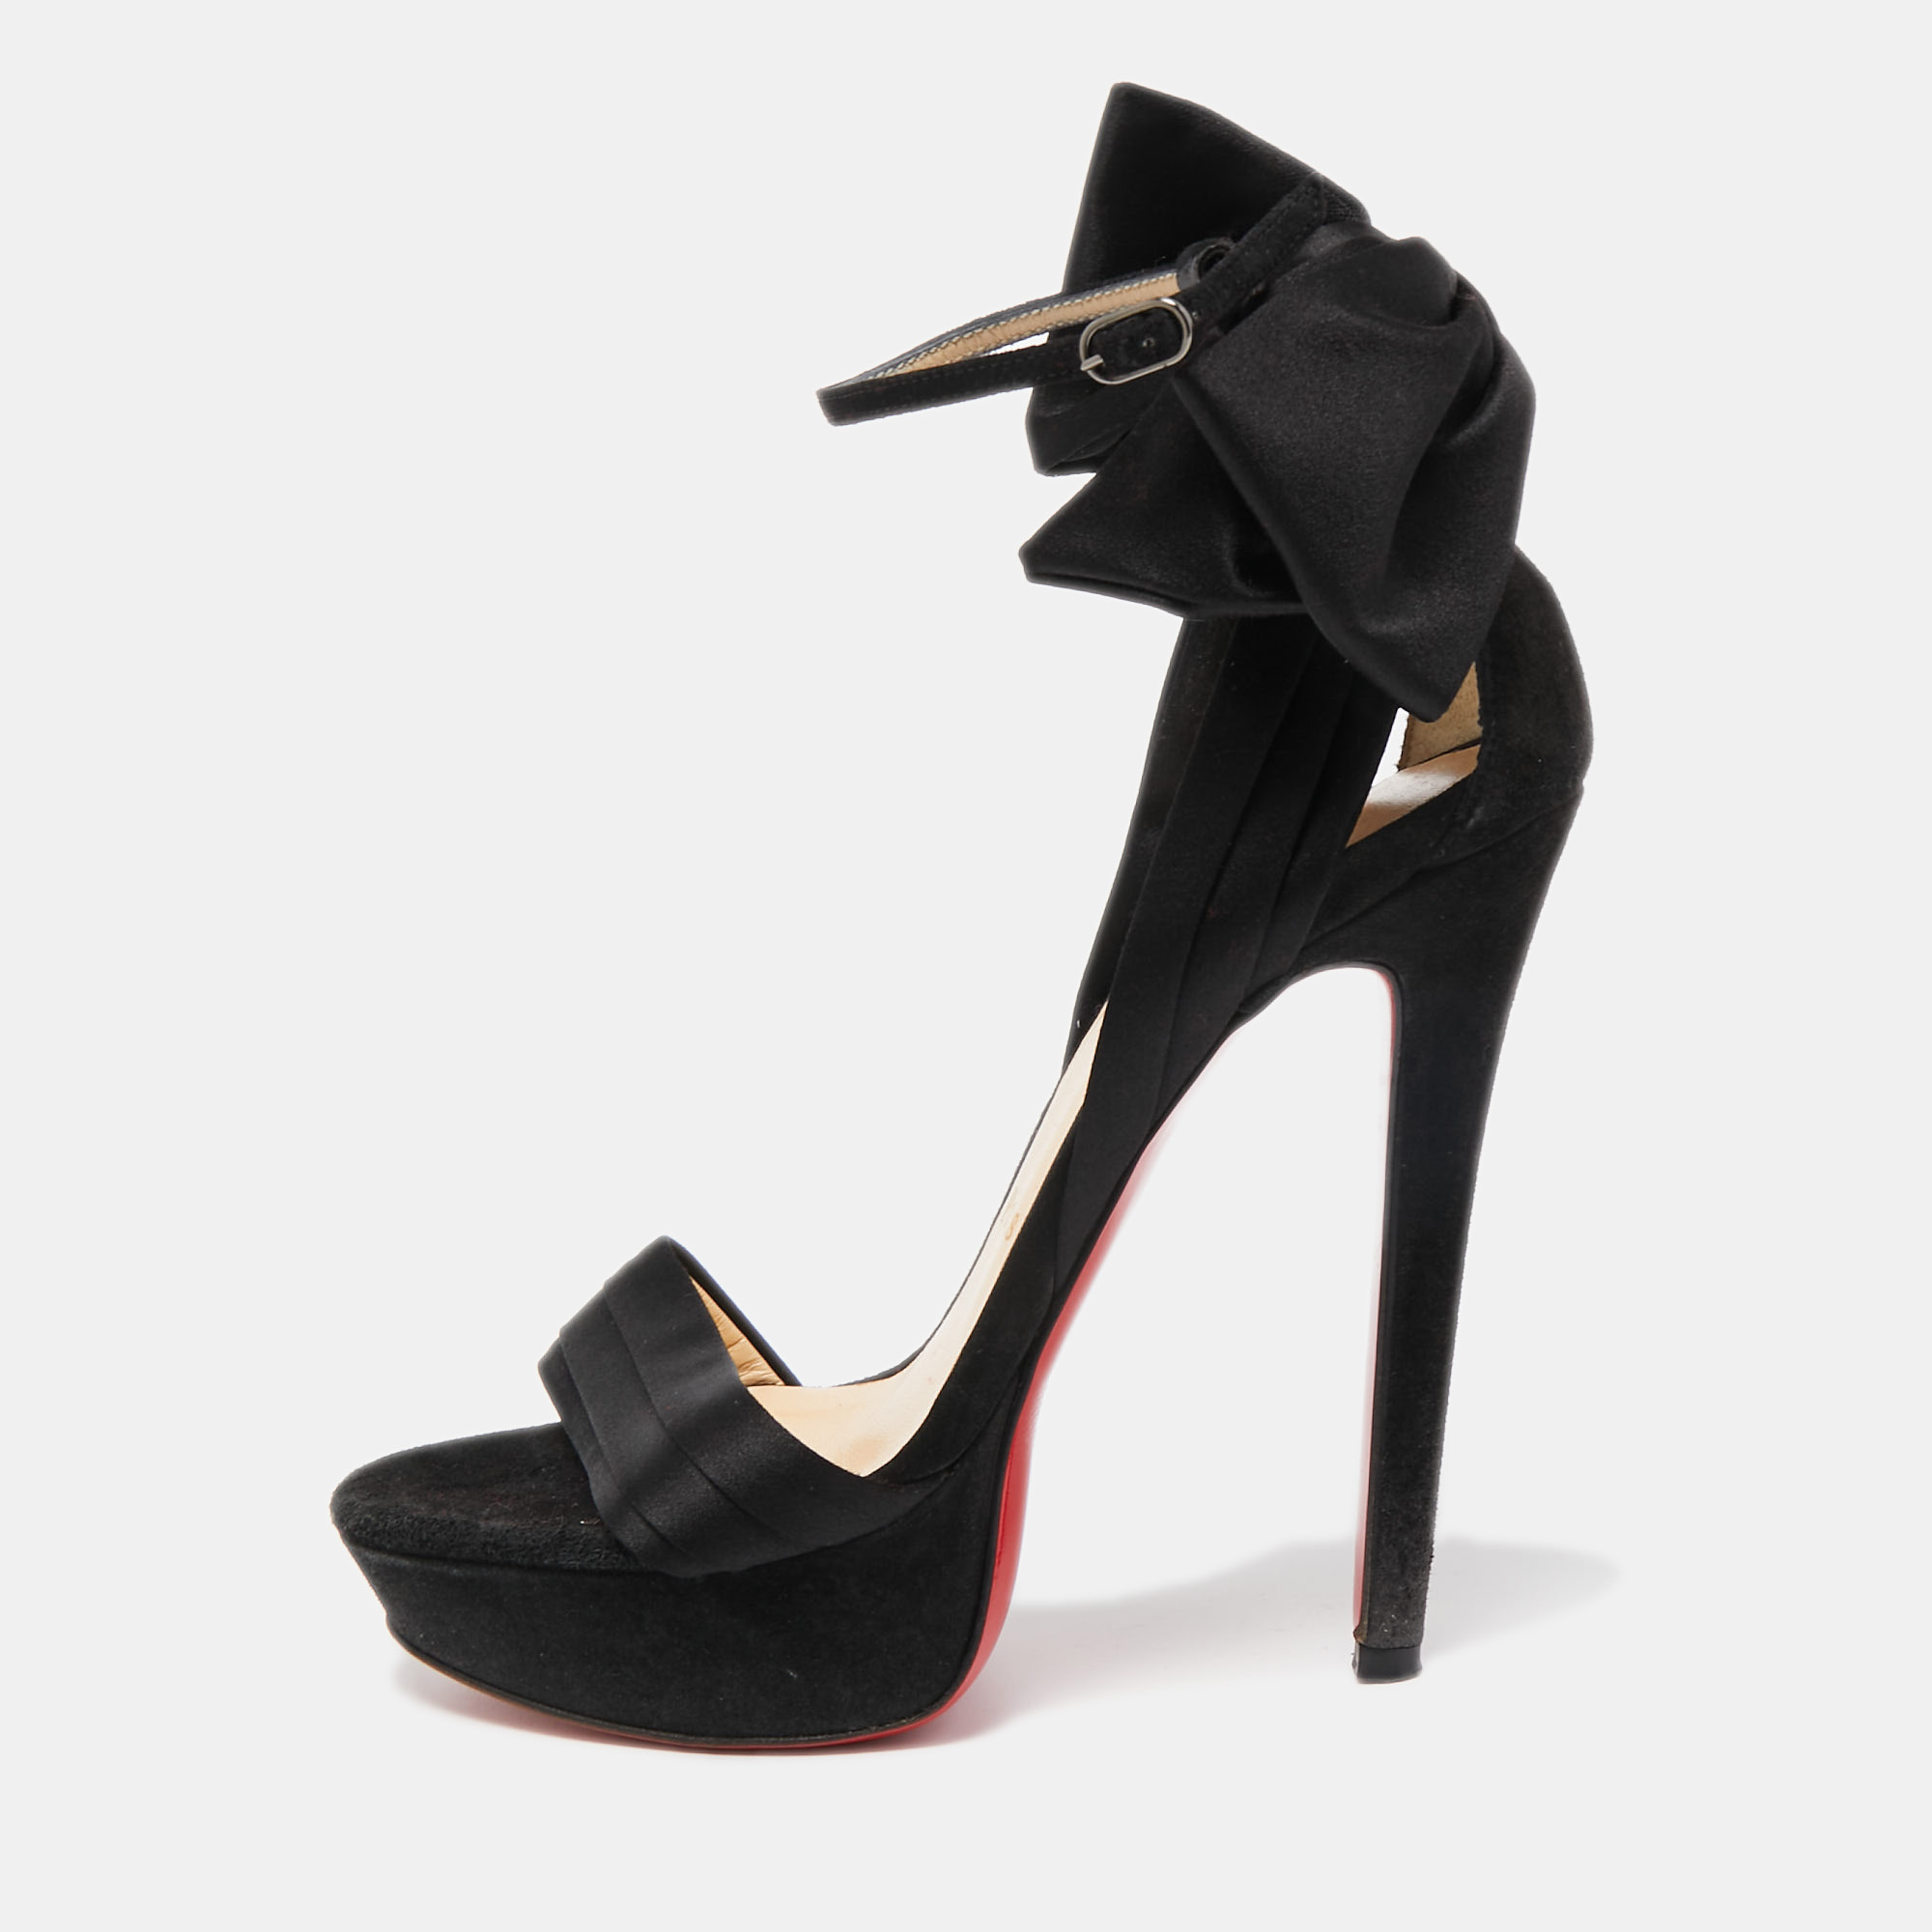 Christian Louboutin Black Satin And Suede Vampanodo Bow Platform Ankle Strap Size 35.5